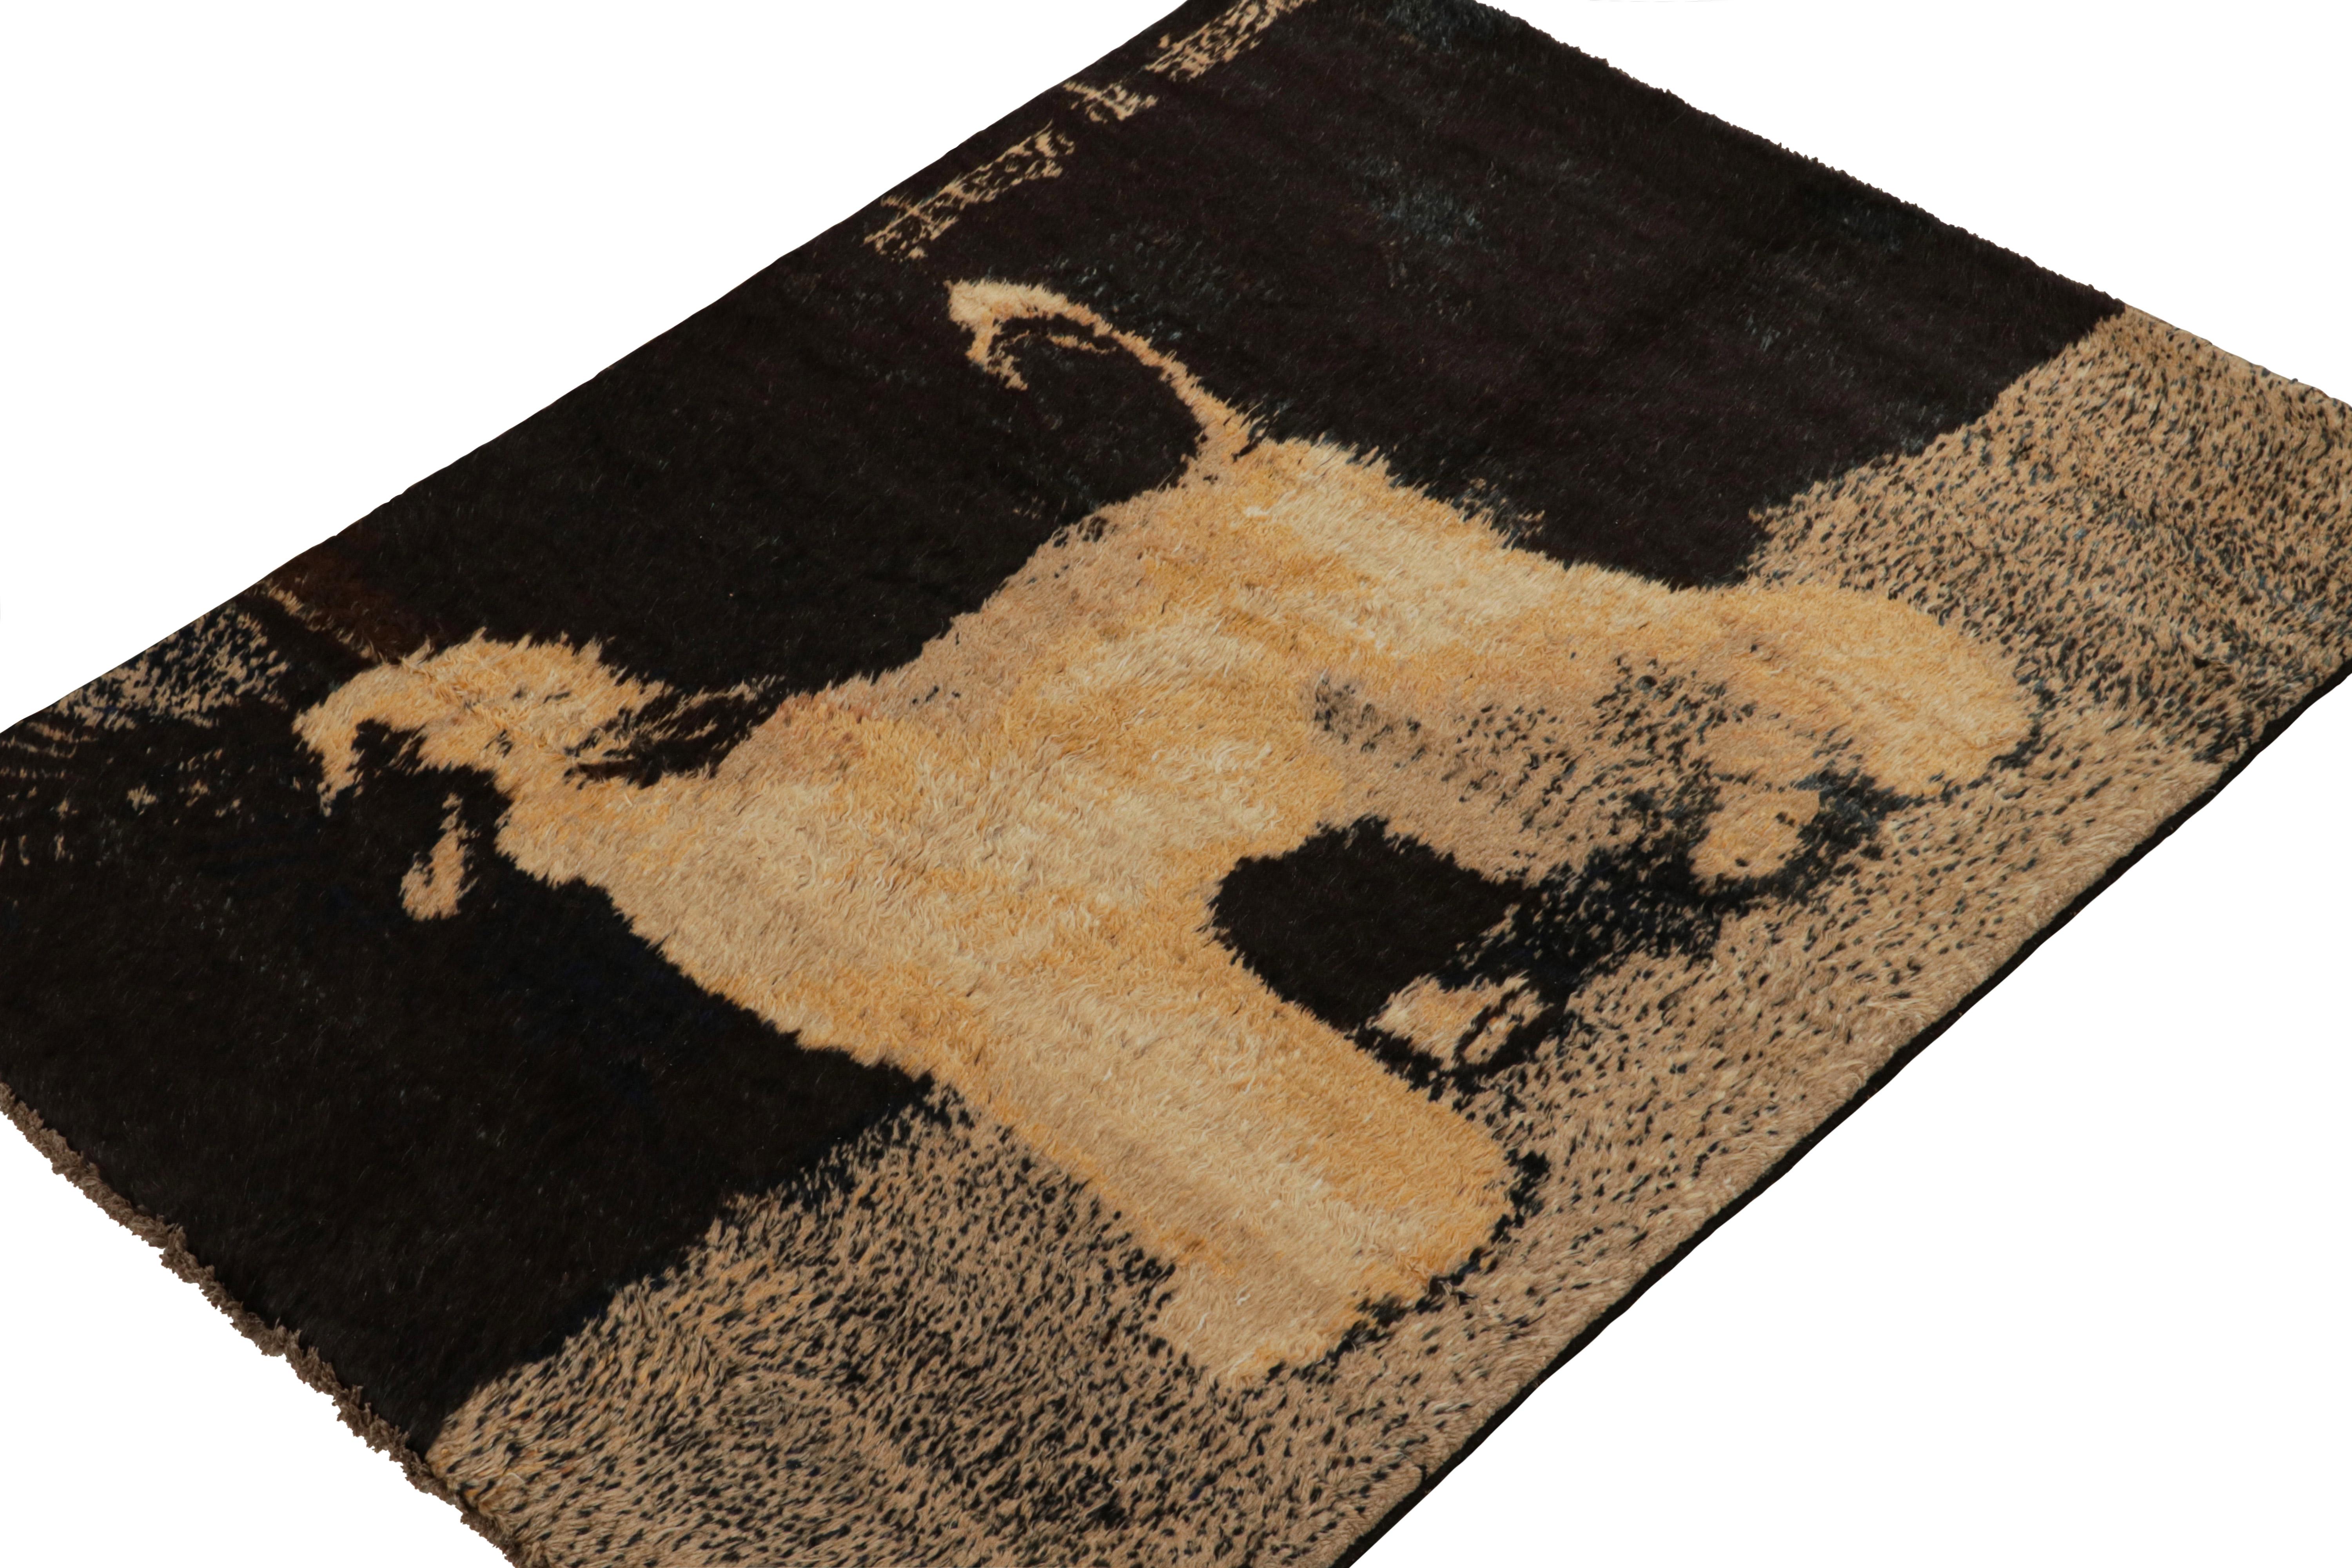 From Rug & Kilim’s Modern collection comes this 6x7 rug - finely hand-knotted in goat hair wool.

On the Design

The pictorial design features an afghan hound like a silhouette in rich gold and brown with black tones. Further carrying a lush